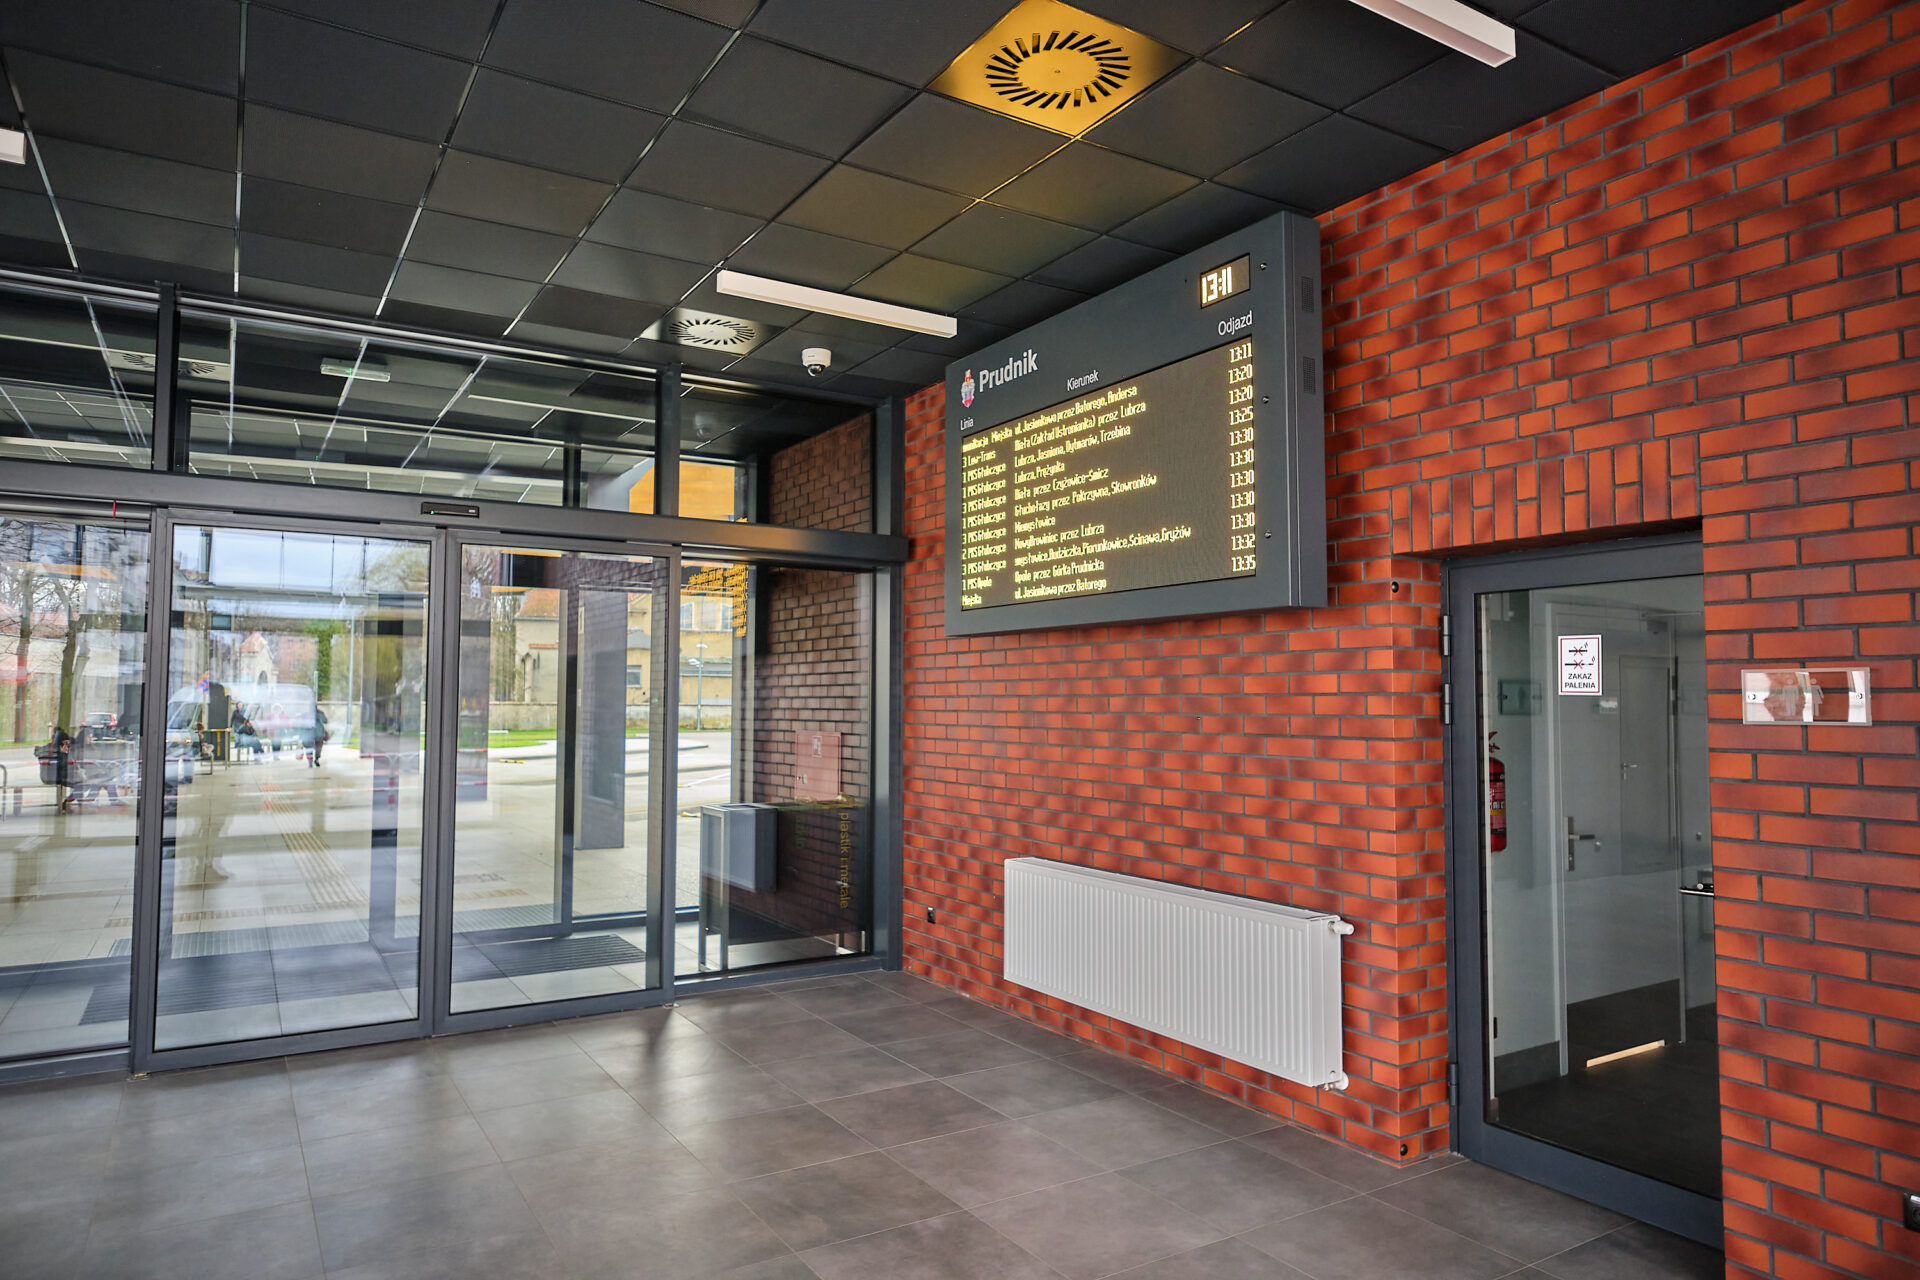 Passenger Information Board I construction of the bus station in Prudnik